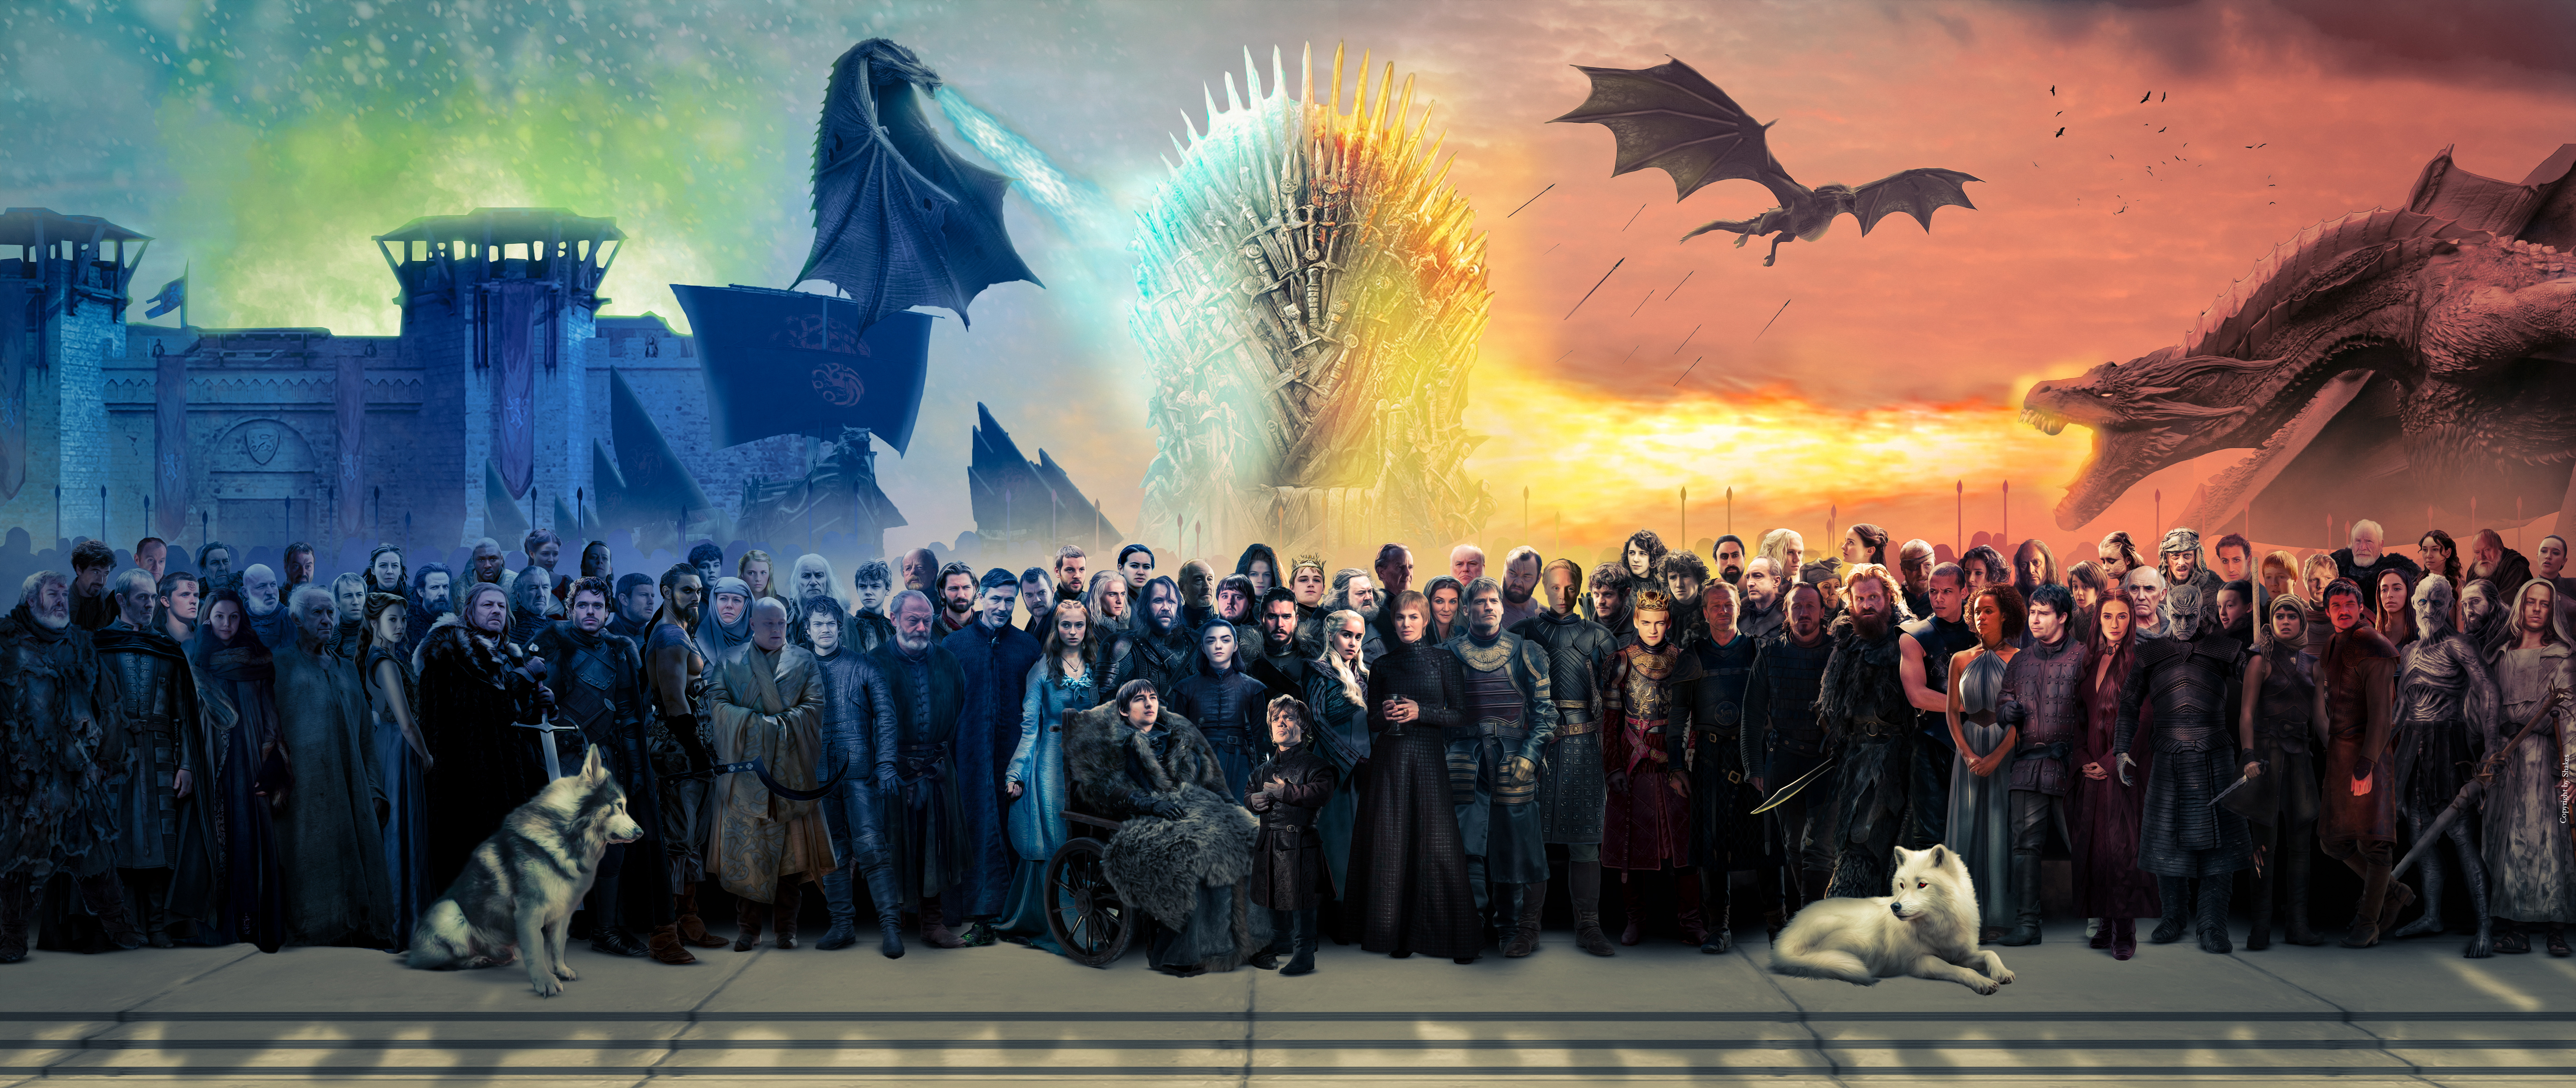 Game Of Thrones 4k Ultra HD Wallpaper by Shakes